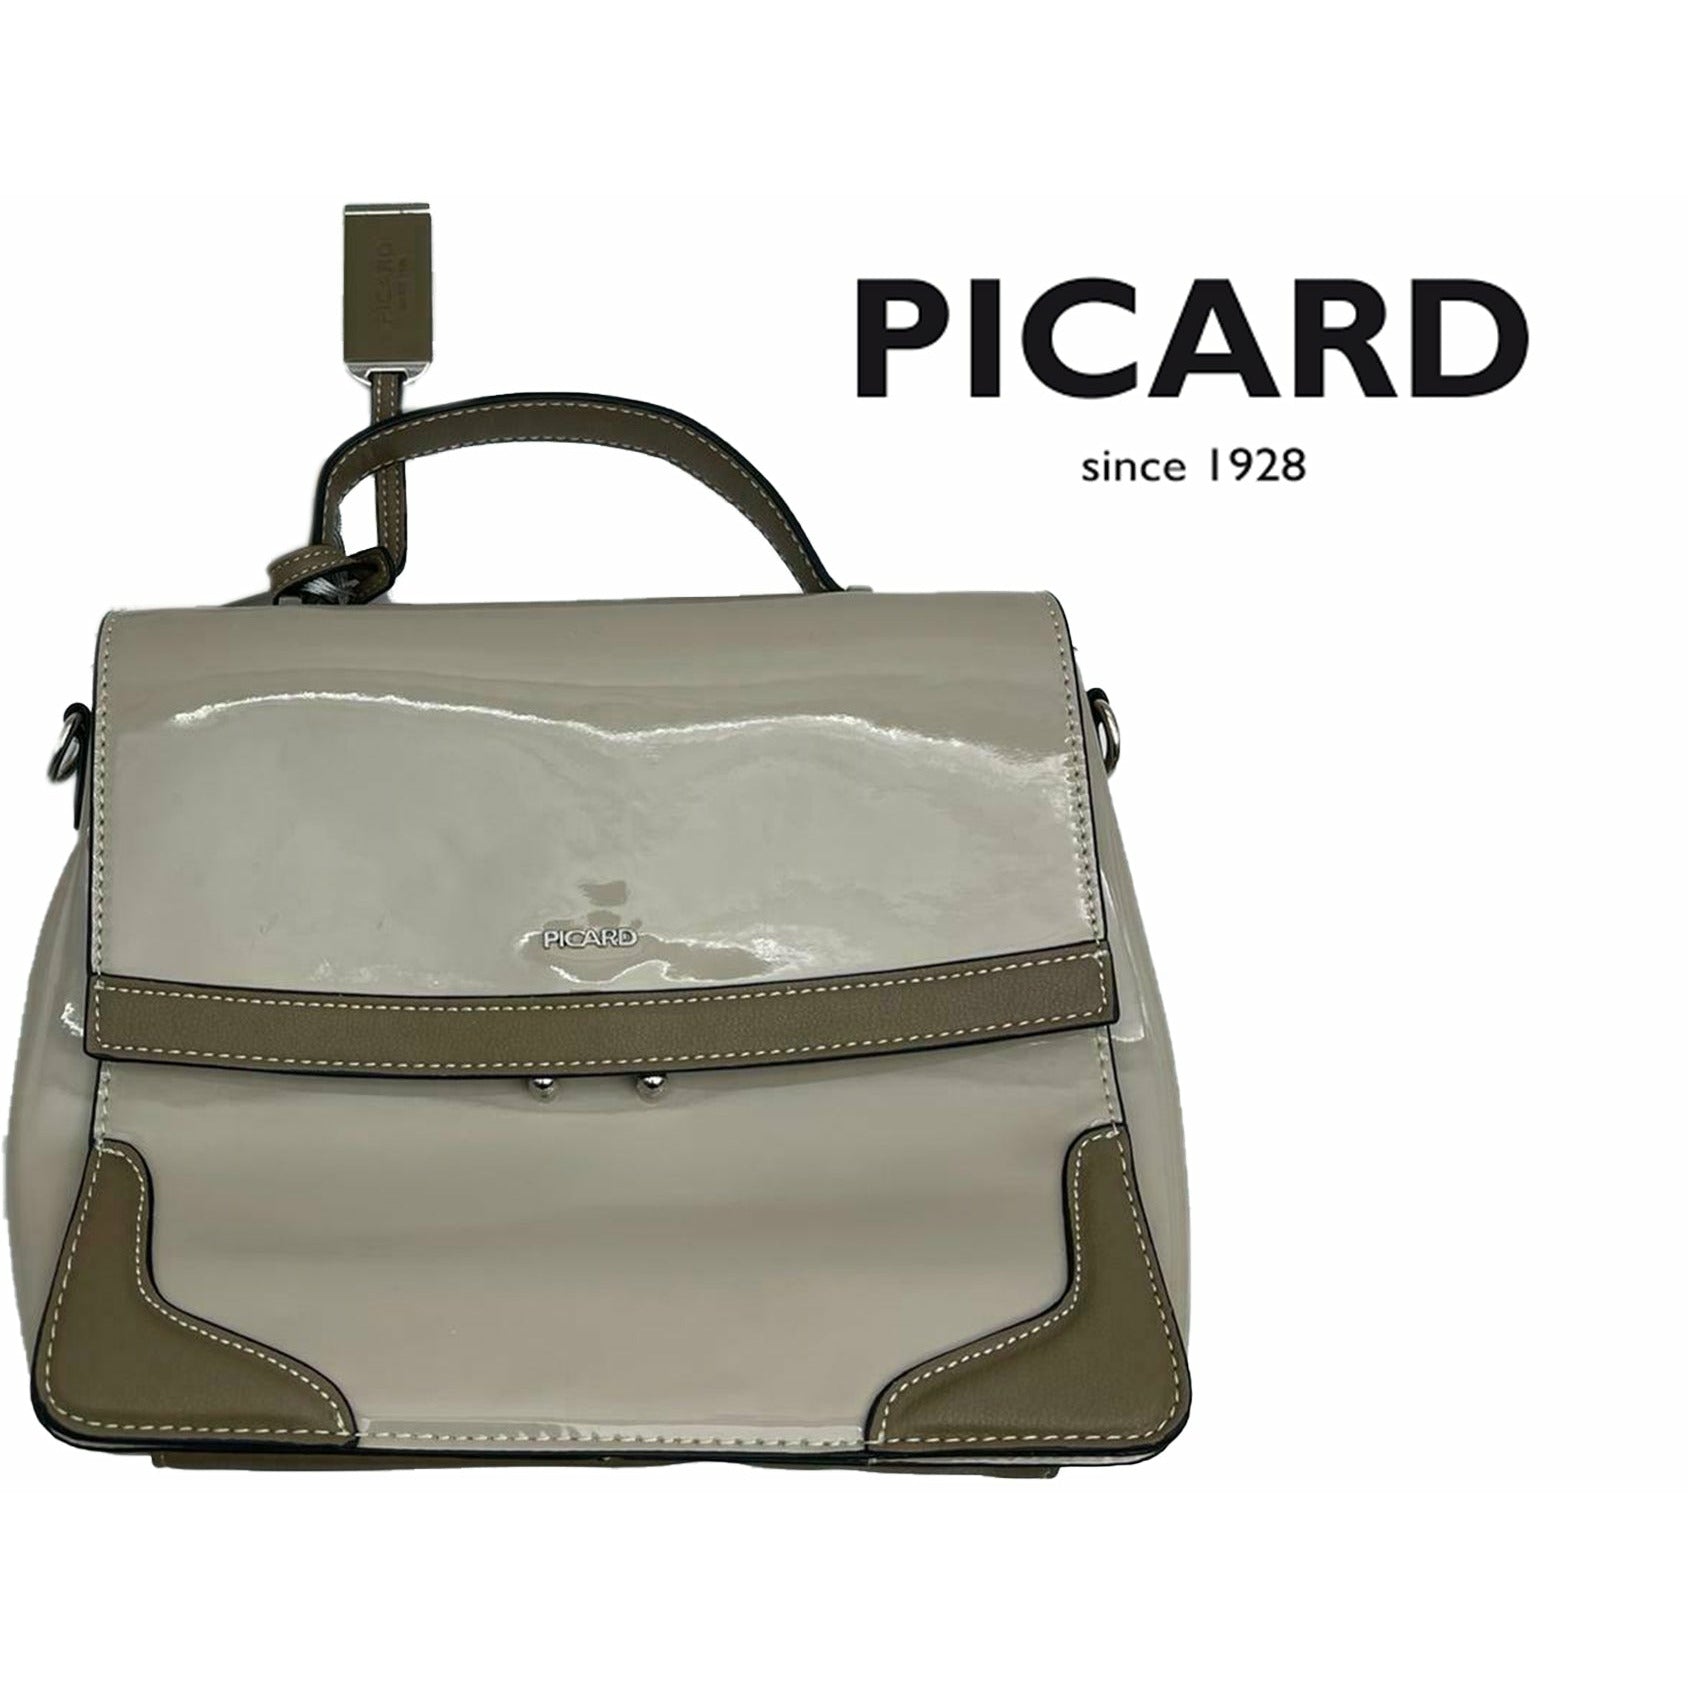 Vintage Women Leather Bags PICARD